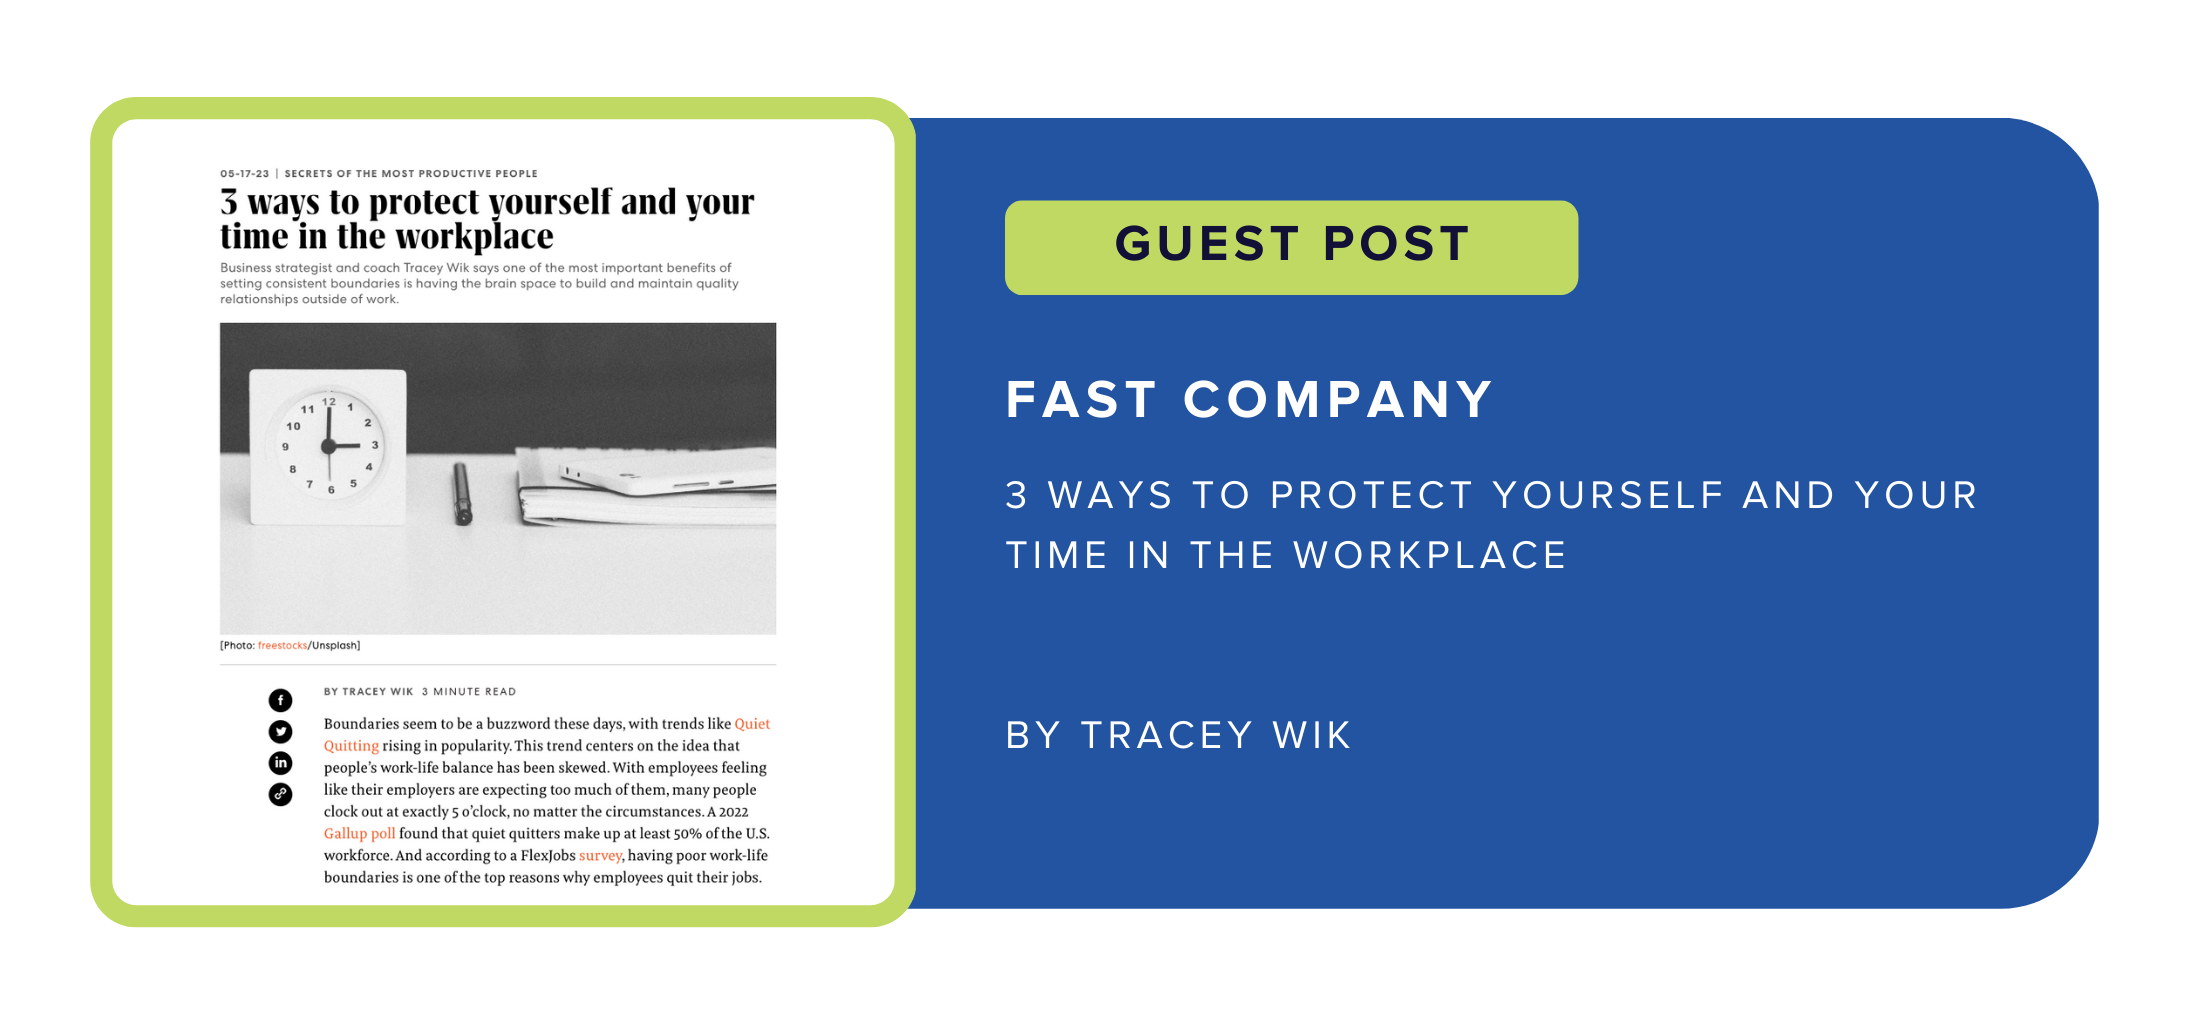 Guest Post in Fast Company: "3 ways to protect yourself and your time in the workplace" by Tracey Wik